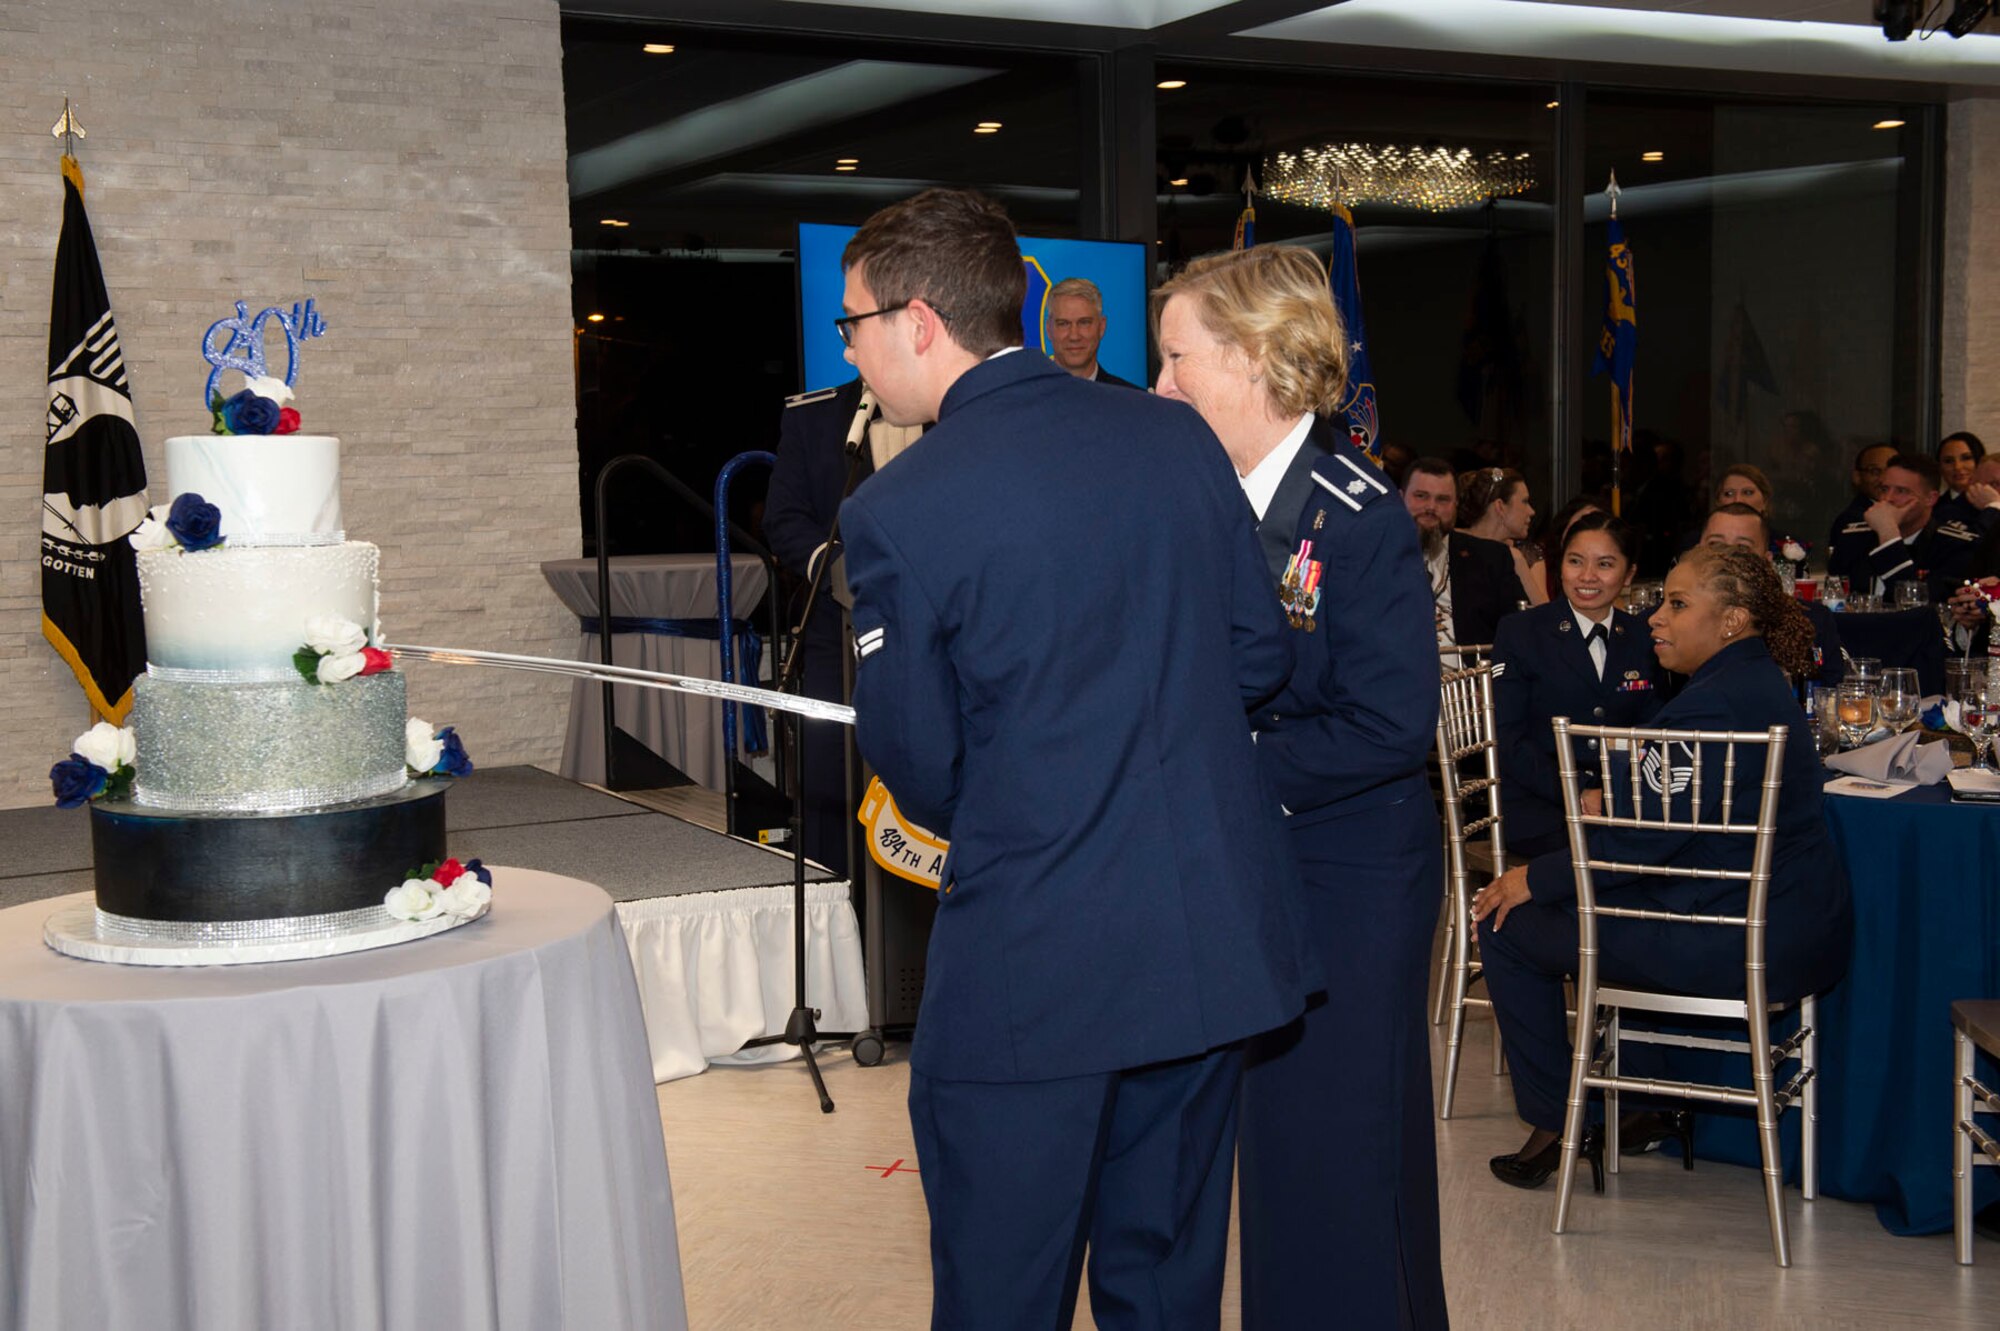 Lt. Col. Kelli Bermudez, 434th Aerospace Medicine Squadron, and Airman1st Class Justin Rowland, 49th Aerial Port Squadron, cut the anniversary cake during the ball. Attendees celebrated both the unit and base's long and storied history. Photo by Master Sgt. Rachel Barton.